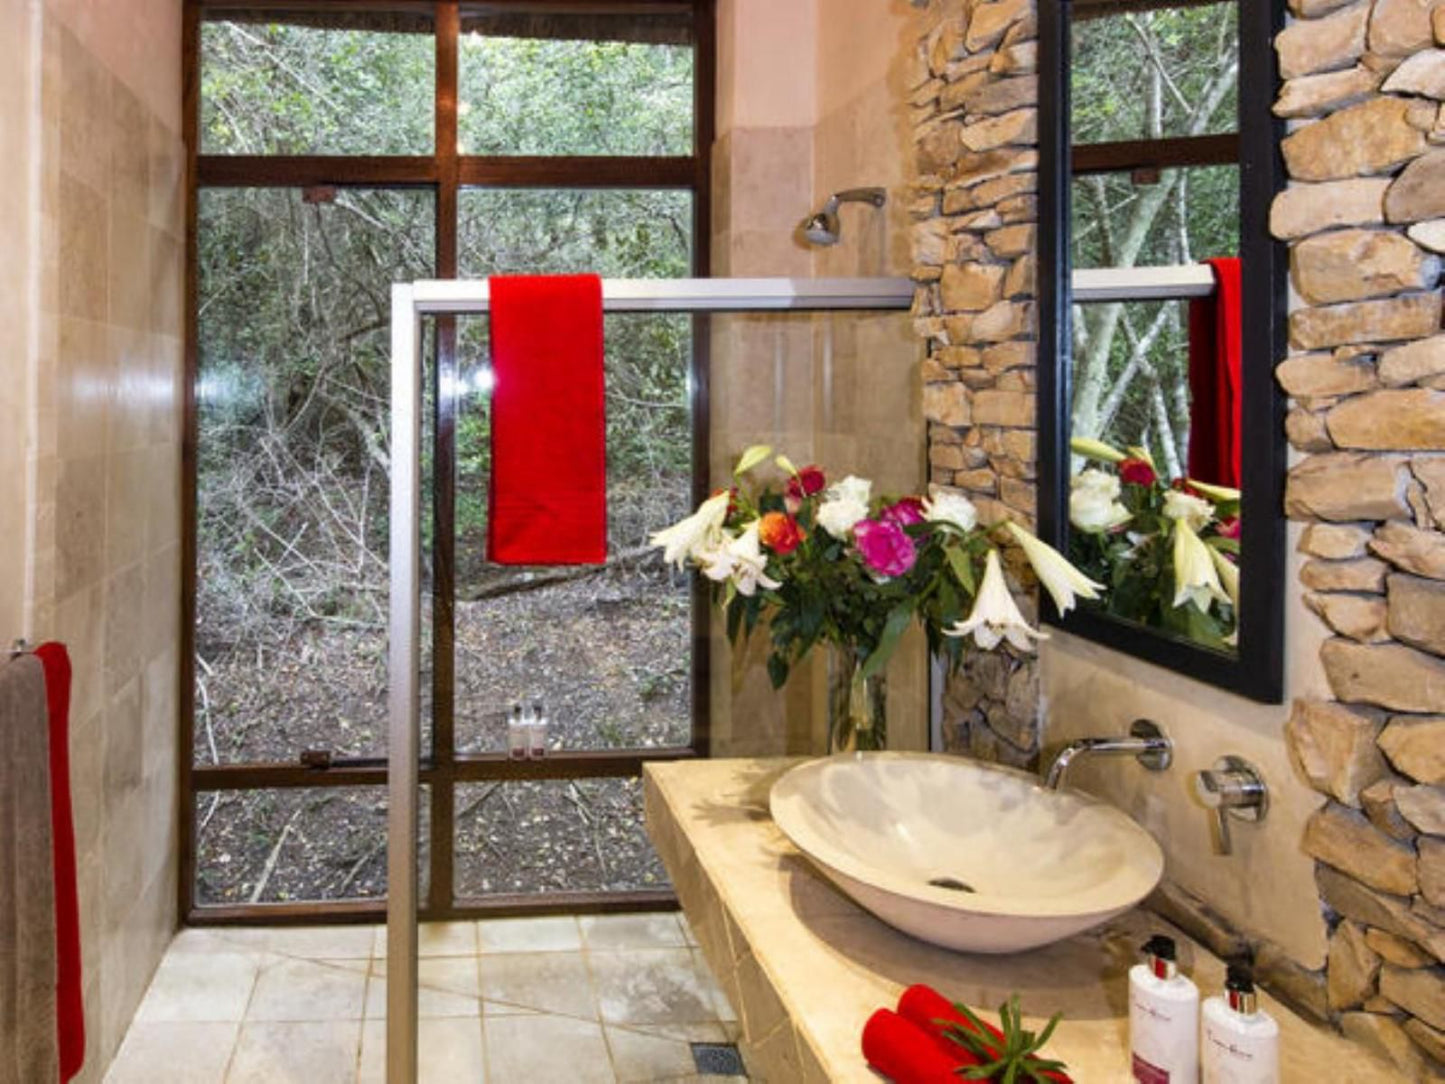 Trogon House And Forest Spa The Crags Western Cape South Africa Rose, Flower, Plant, Nature, Bathroom